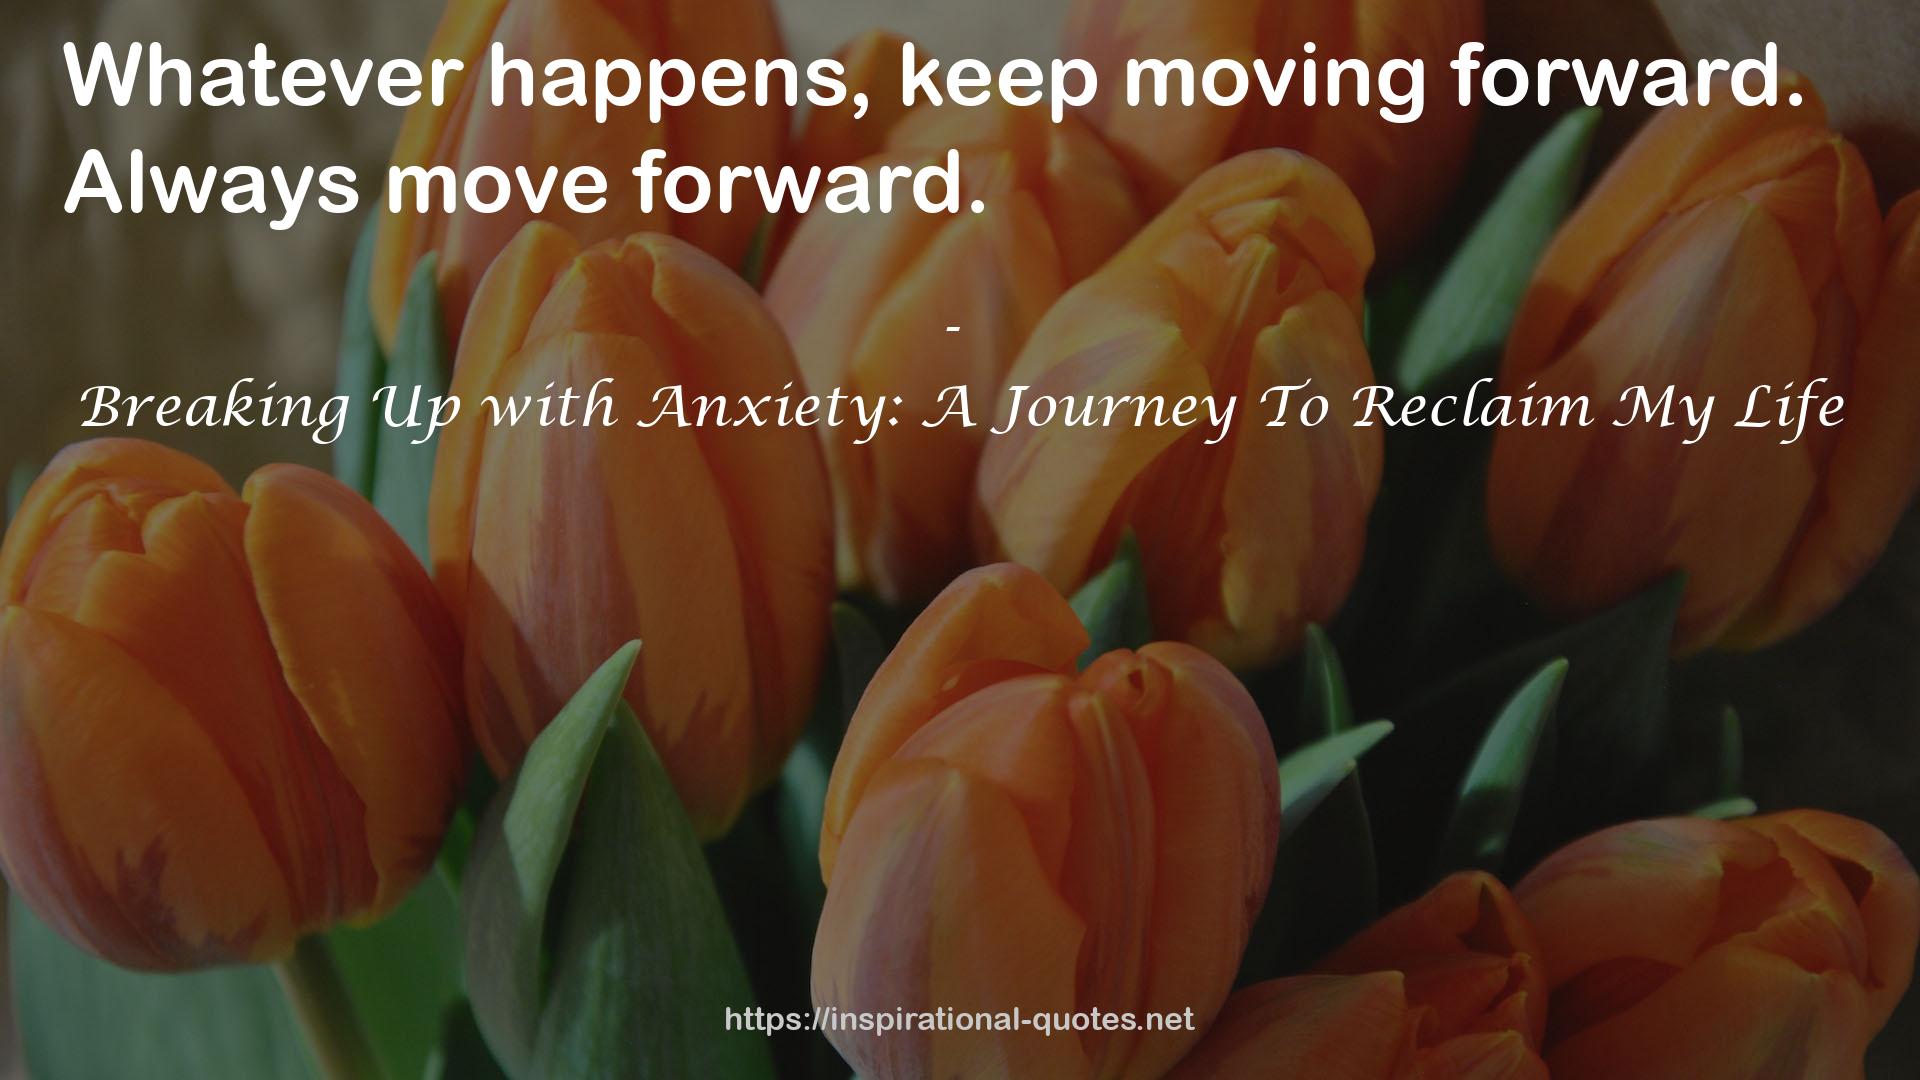 Breaking Up with Anxiety: A Journey To Reclaim My Life QUOTES